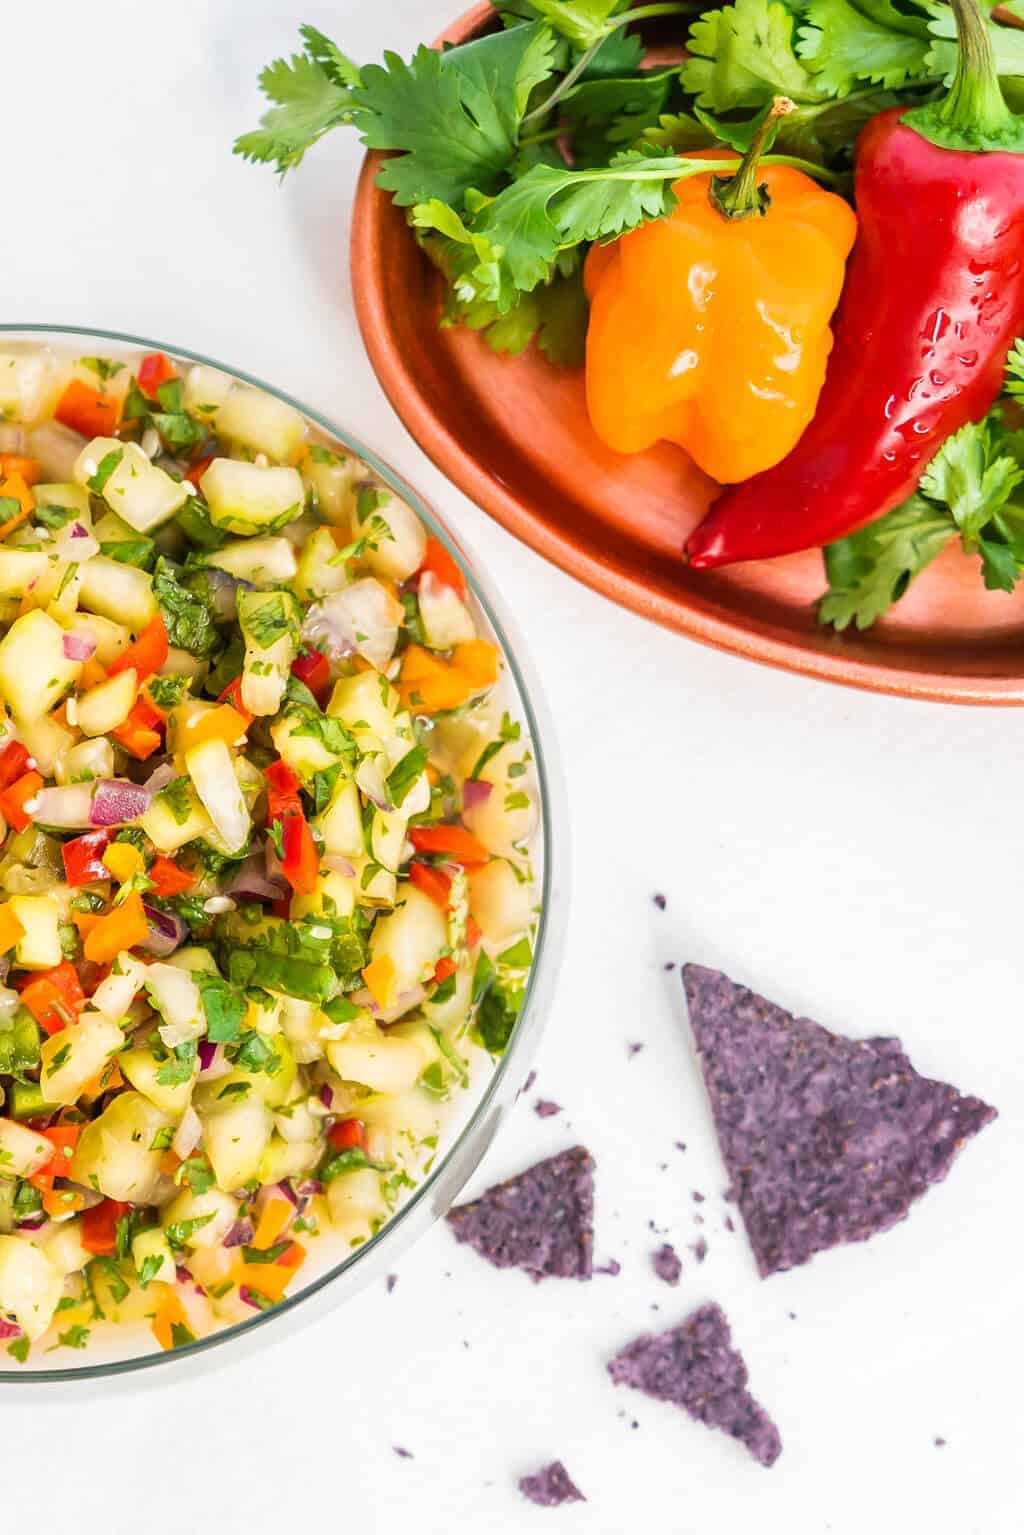 Cucumber salsa in a large bowl next to a platter of fresh peppers.